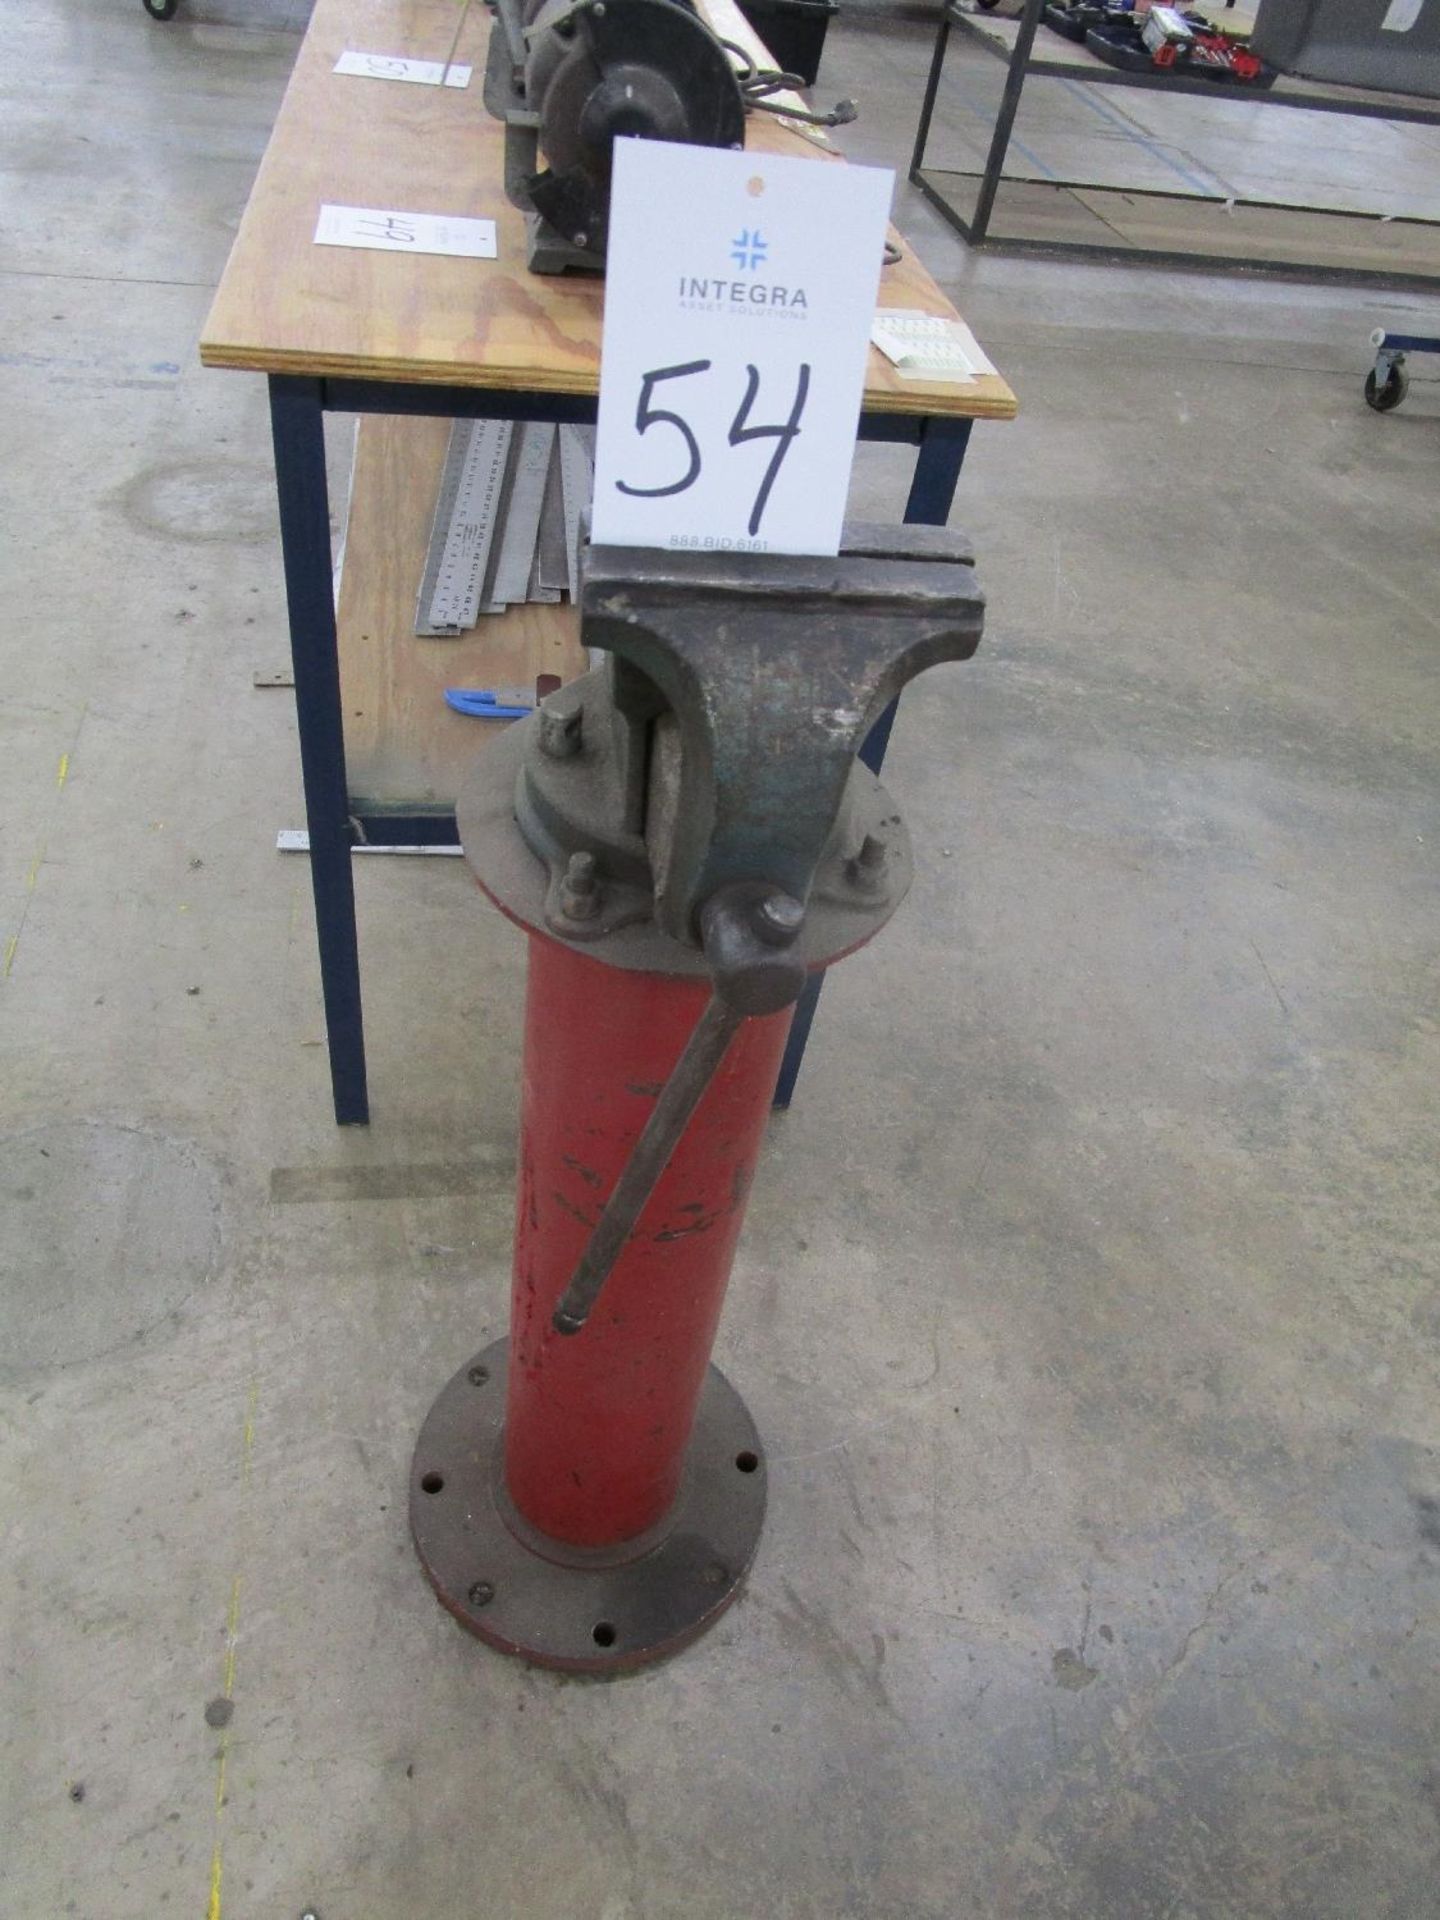 6" Bench Vise with Pedestal